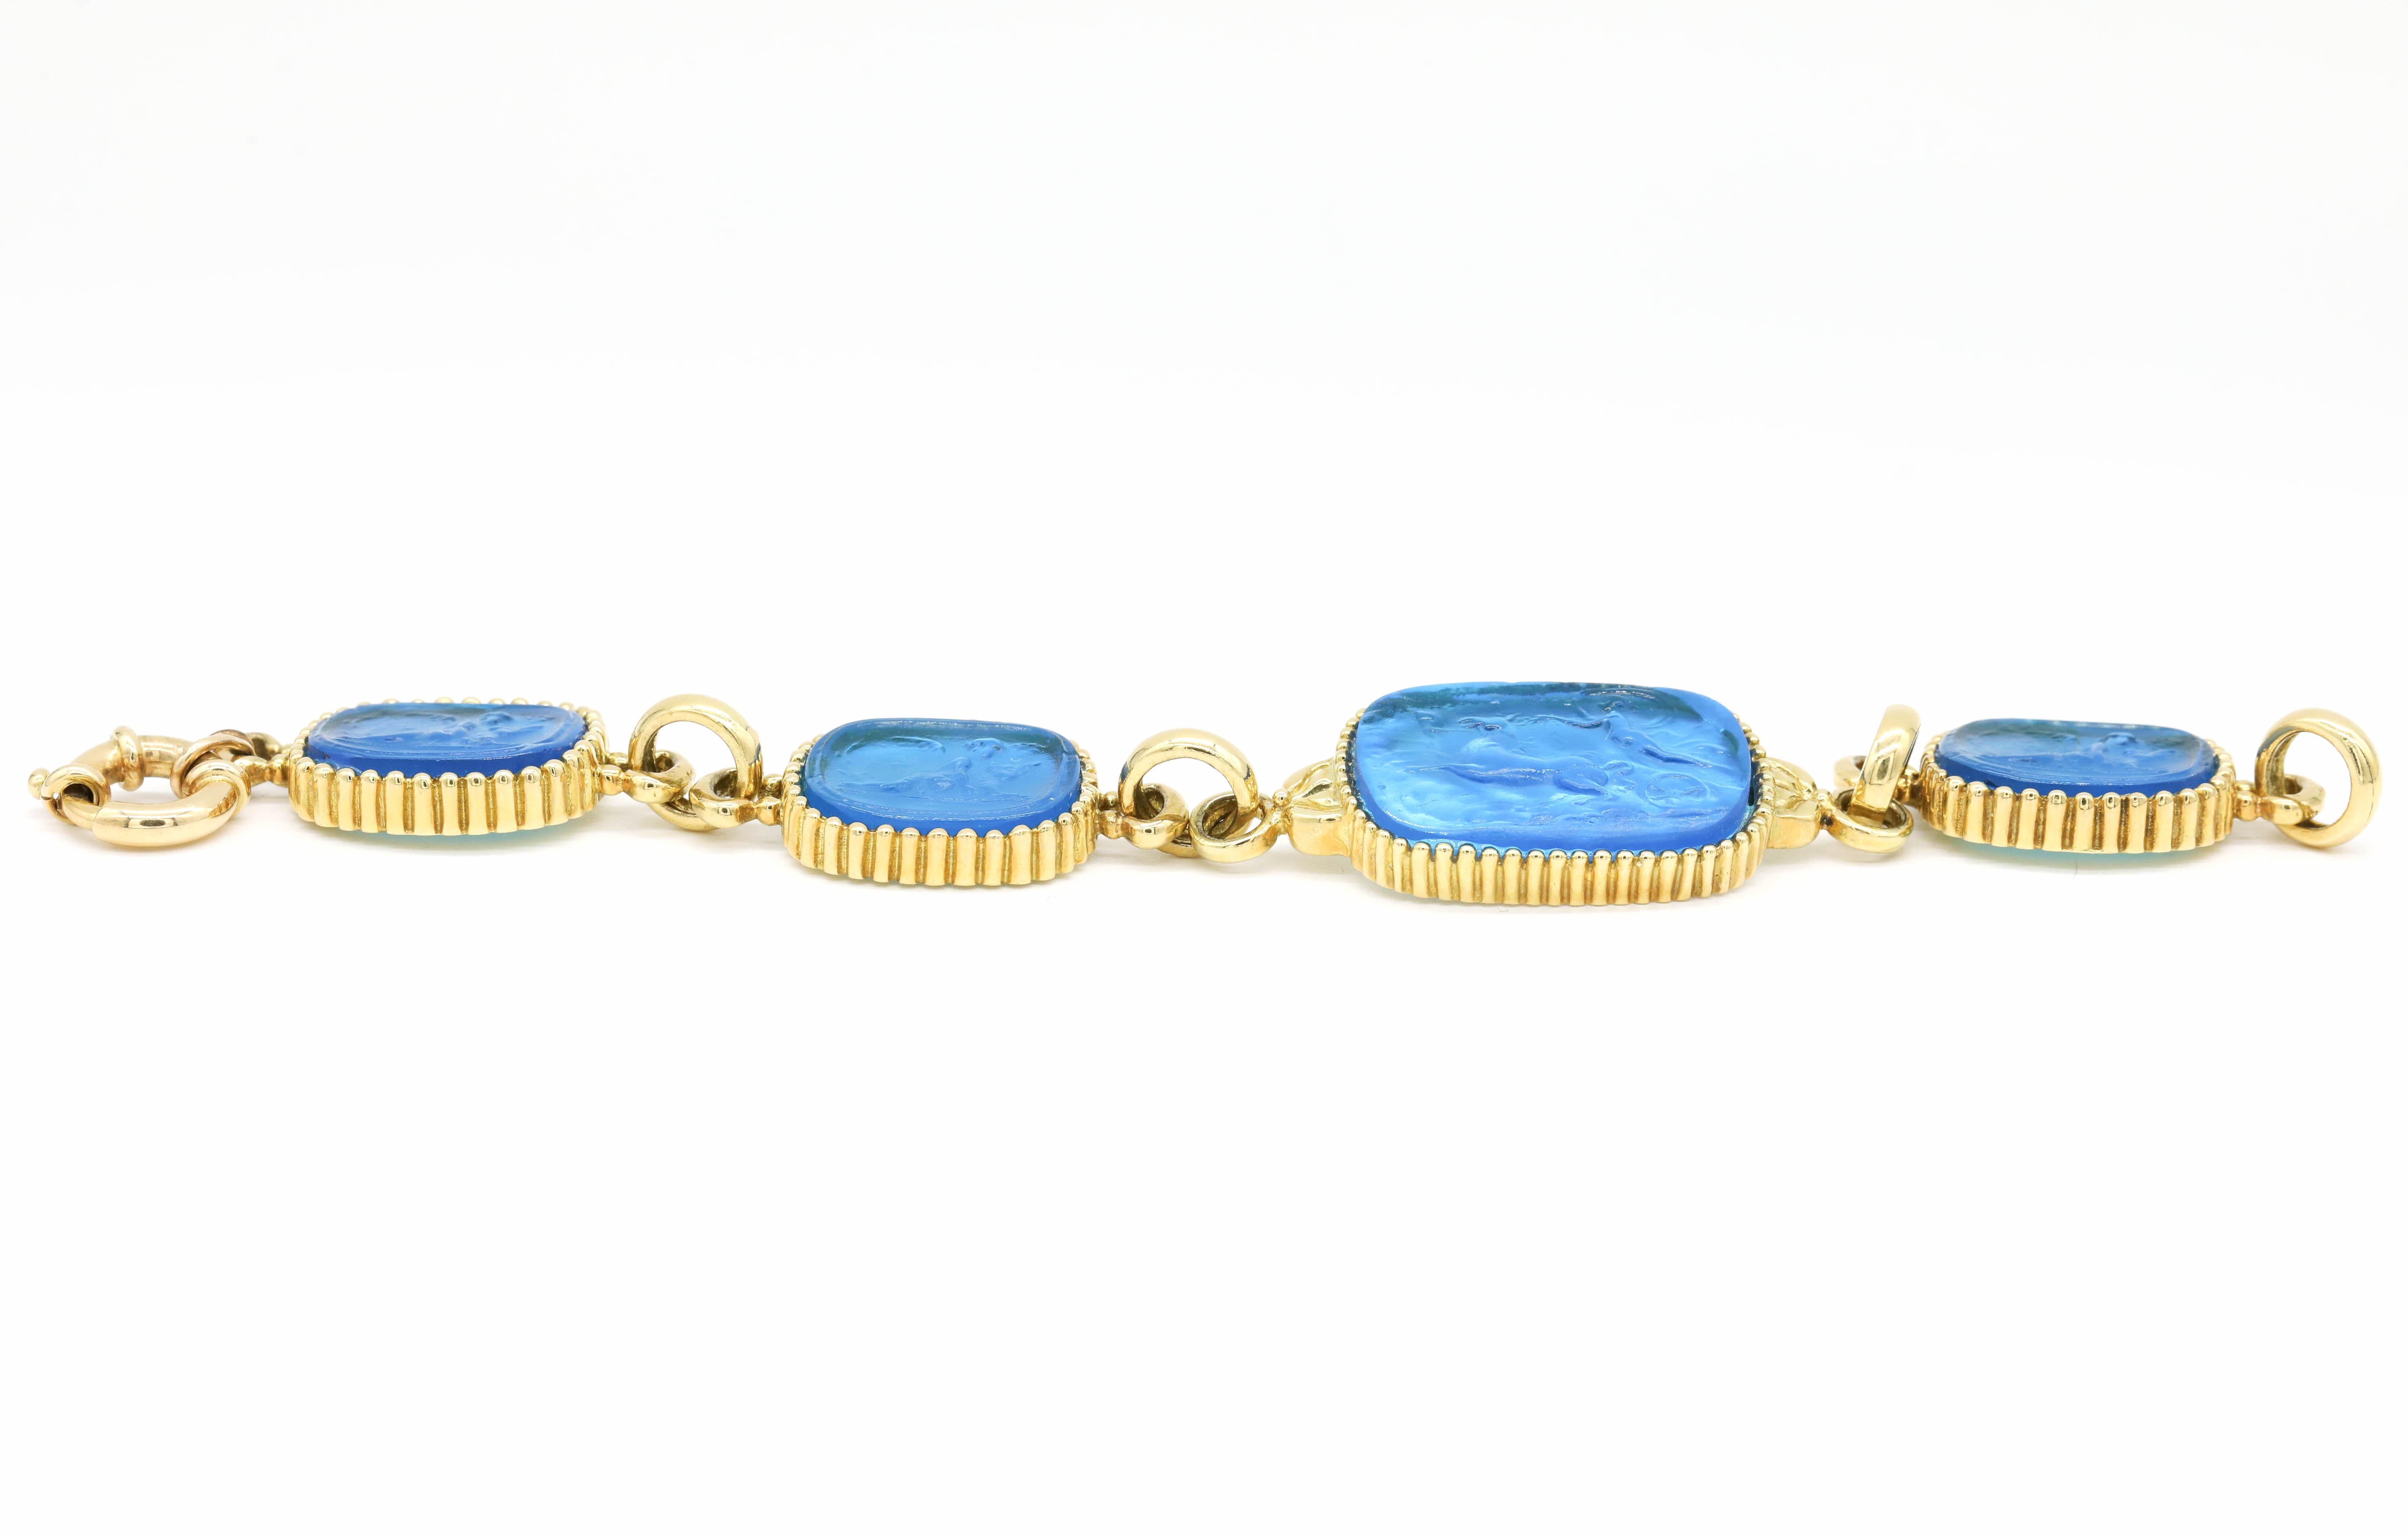 New Victorian Blue Carved Italian Murano Glass Cameo Intaglio Bracelet 18k Yellow Gold

A cameo, an intaglio is created by carving below the surface to produce an image in relief, with the purpose of pressing into sealing wax. Intaglios were often